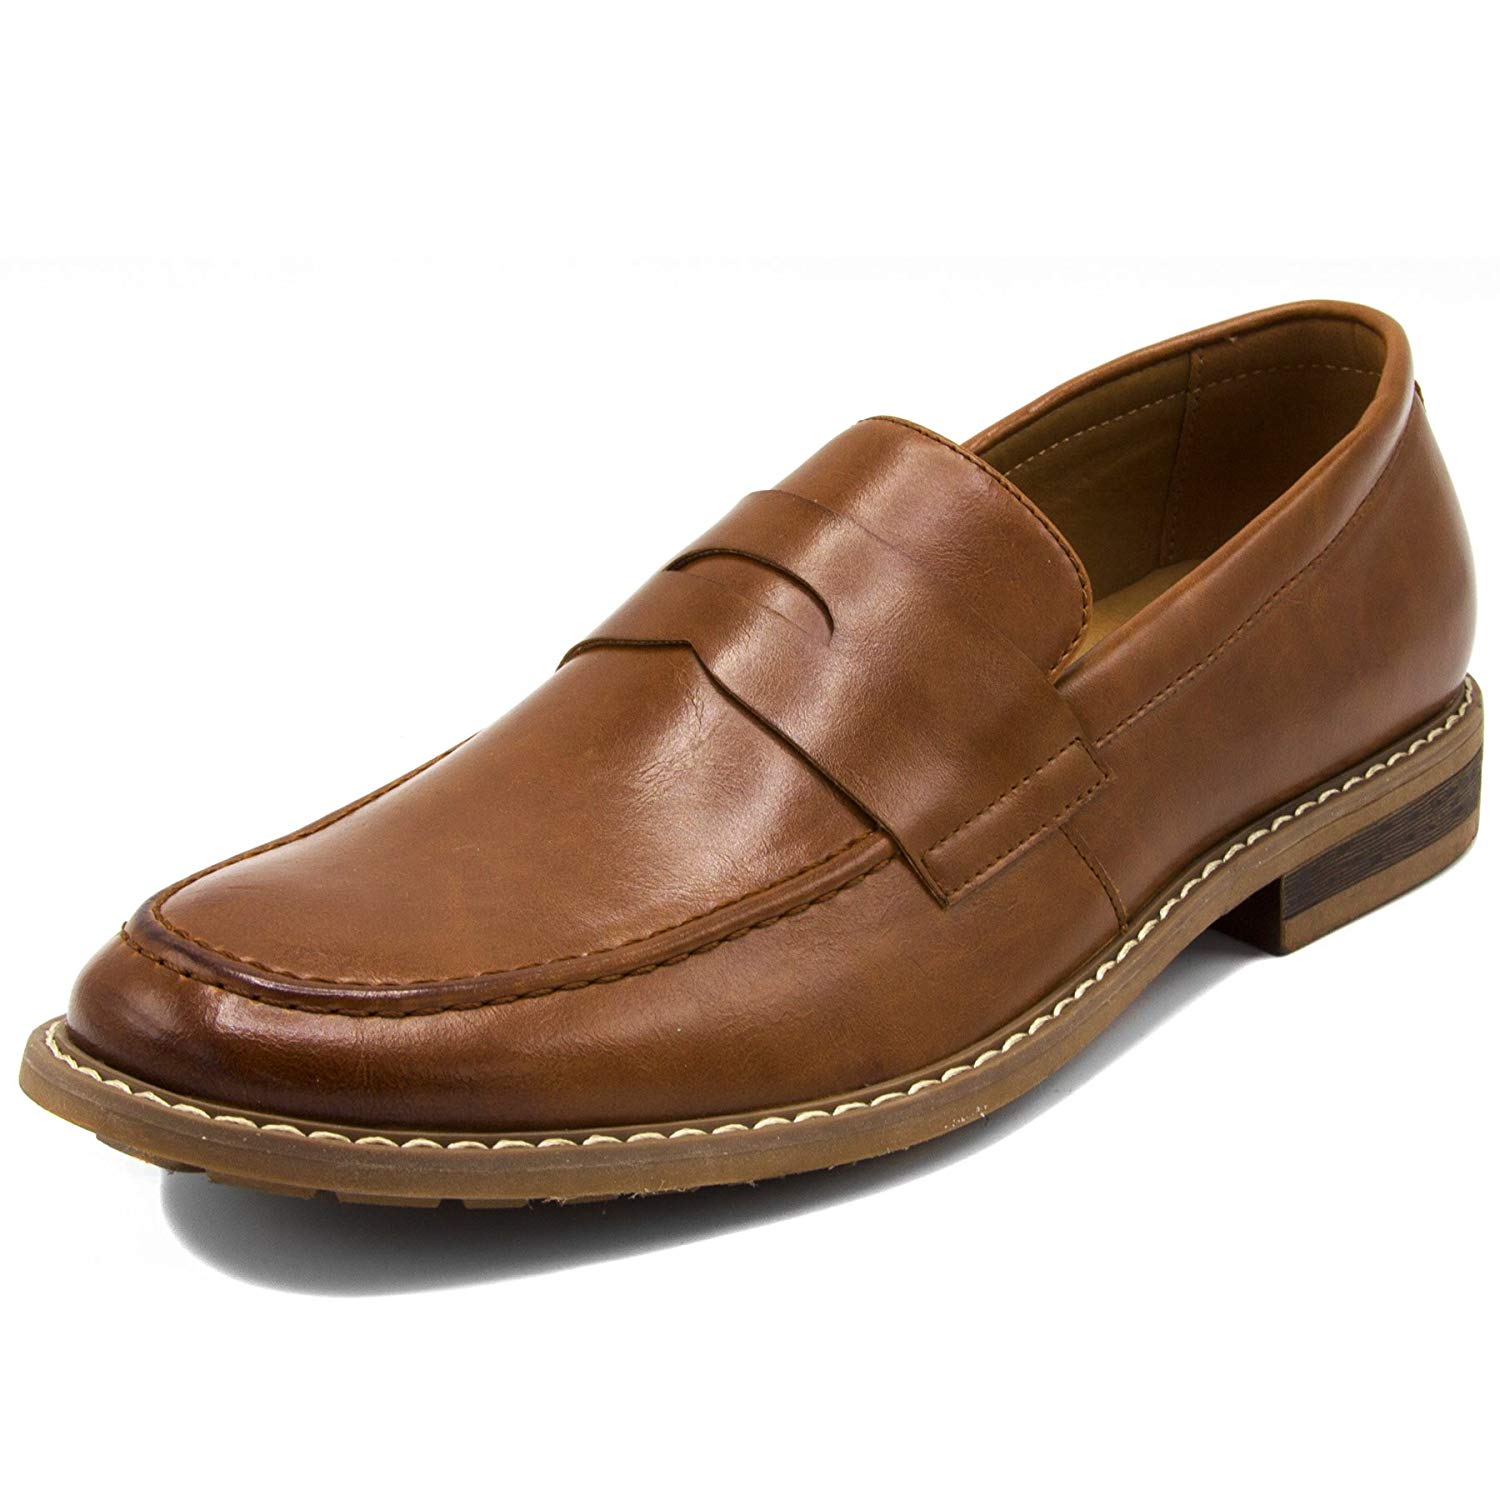 Nautica Men's Dress Shoes Slip On Oxford Moc Toe Loafer, Tan Smooth ...